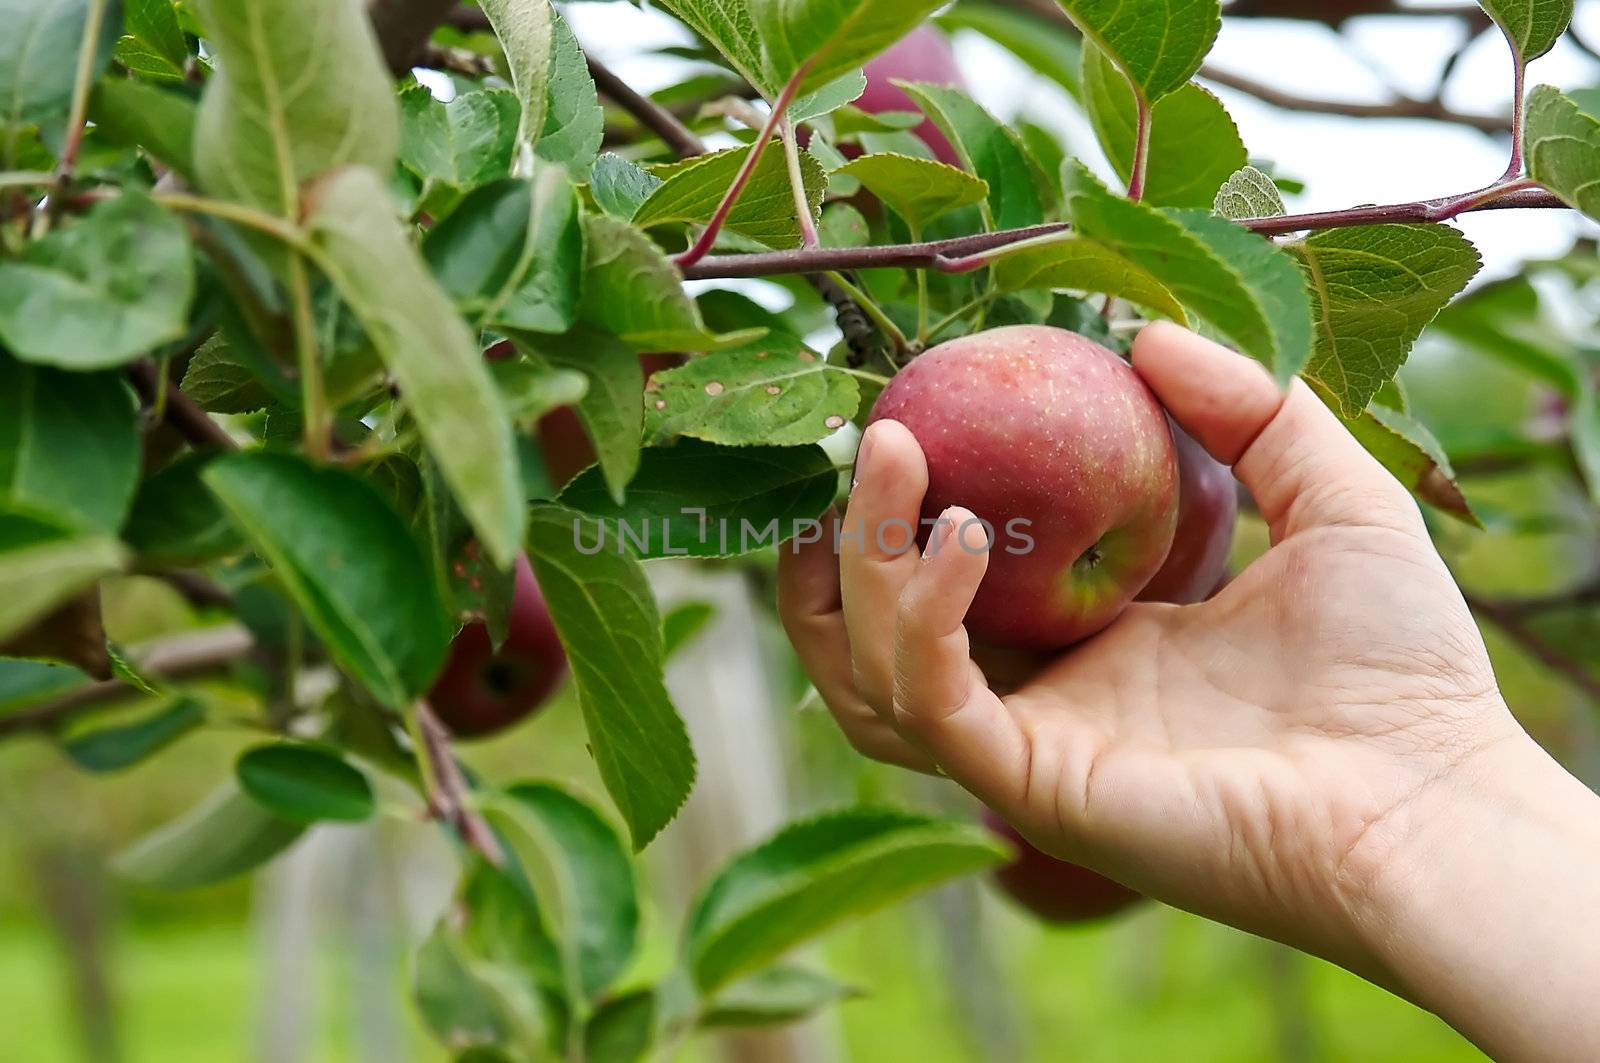 Right hand picking a delicious apple from an appletree